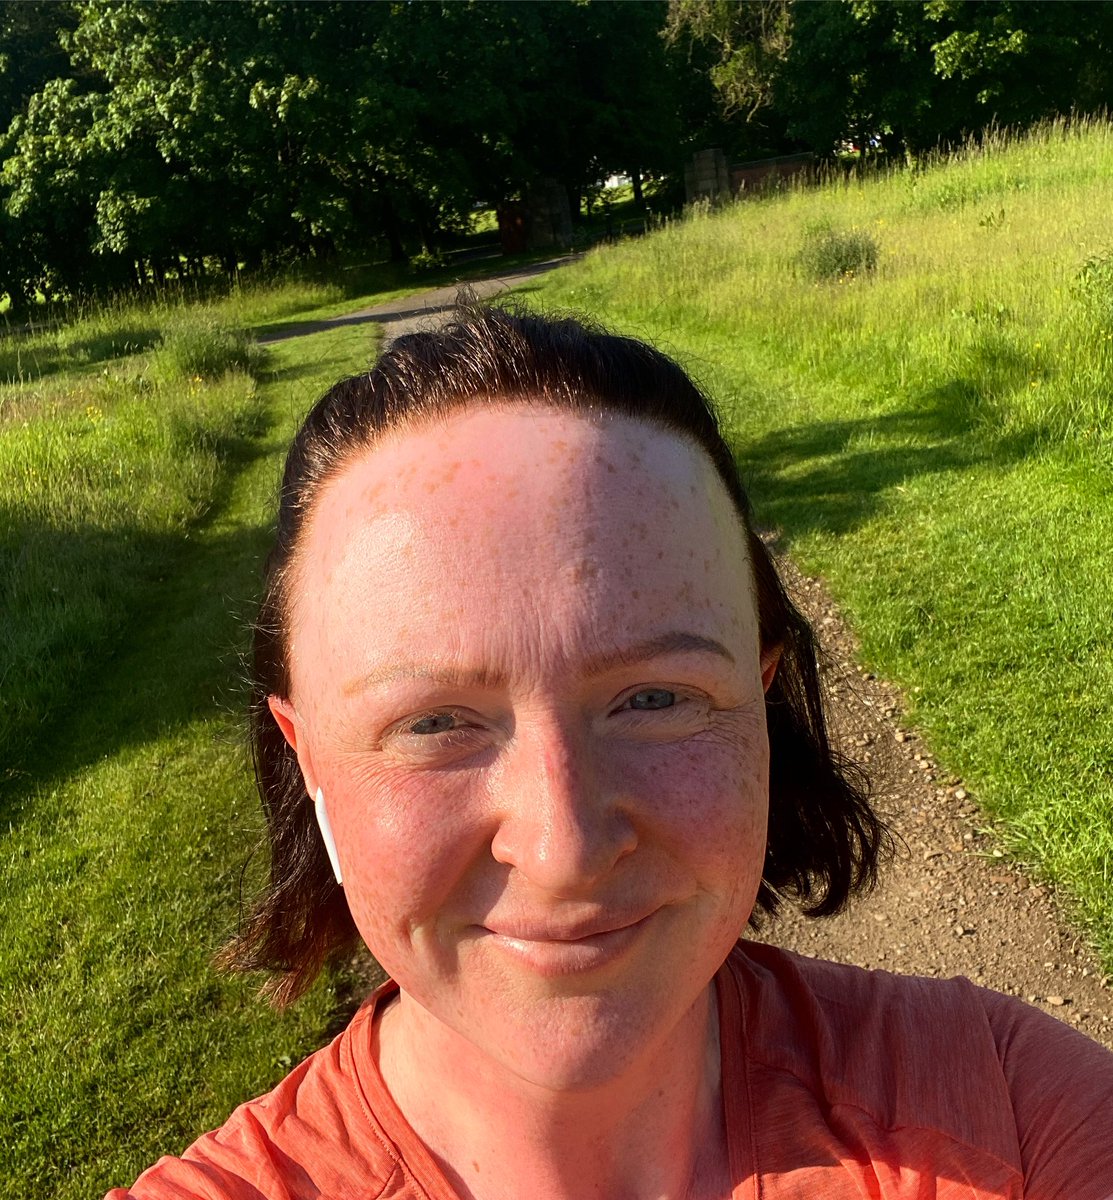 That was hard after having a baby and not running for a year, @Couchto5K run 1 week 1 done.🥵 let’s see if I can get to week 9!😊🏃🏻‍♀️🏃🏻‍♀️